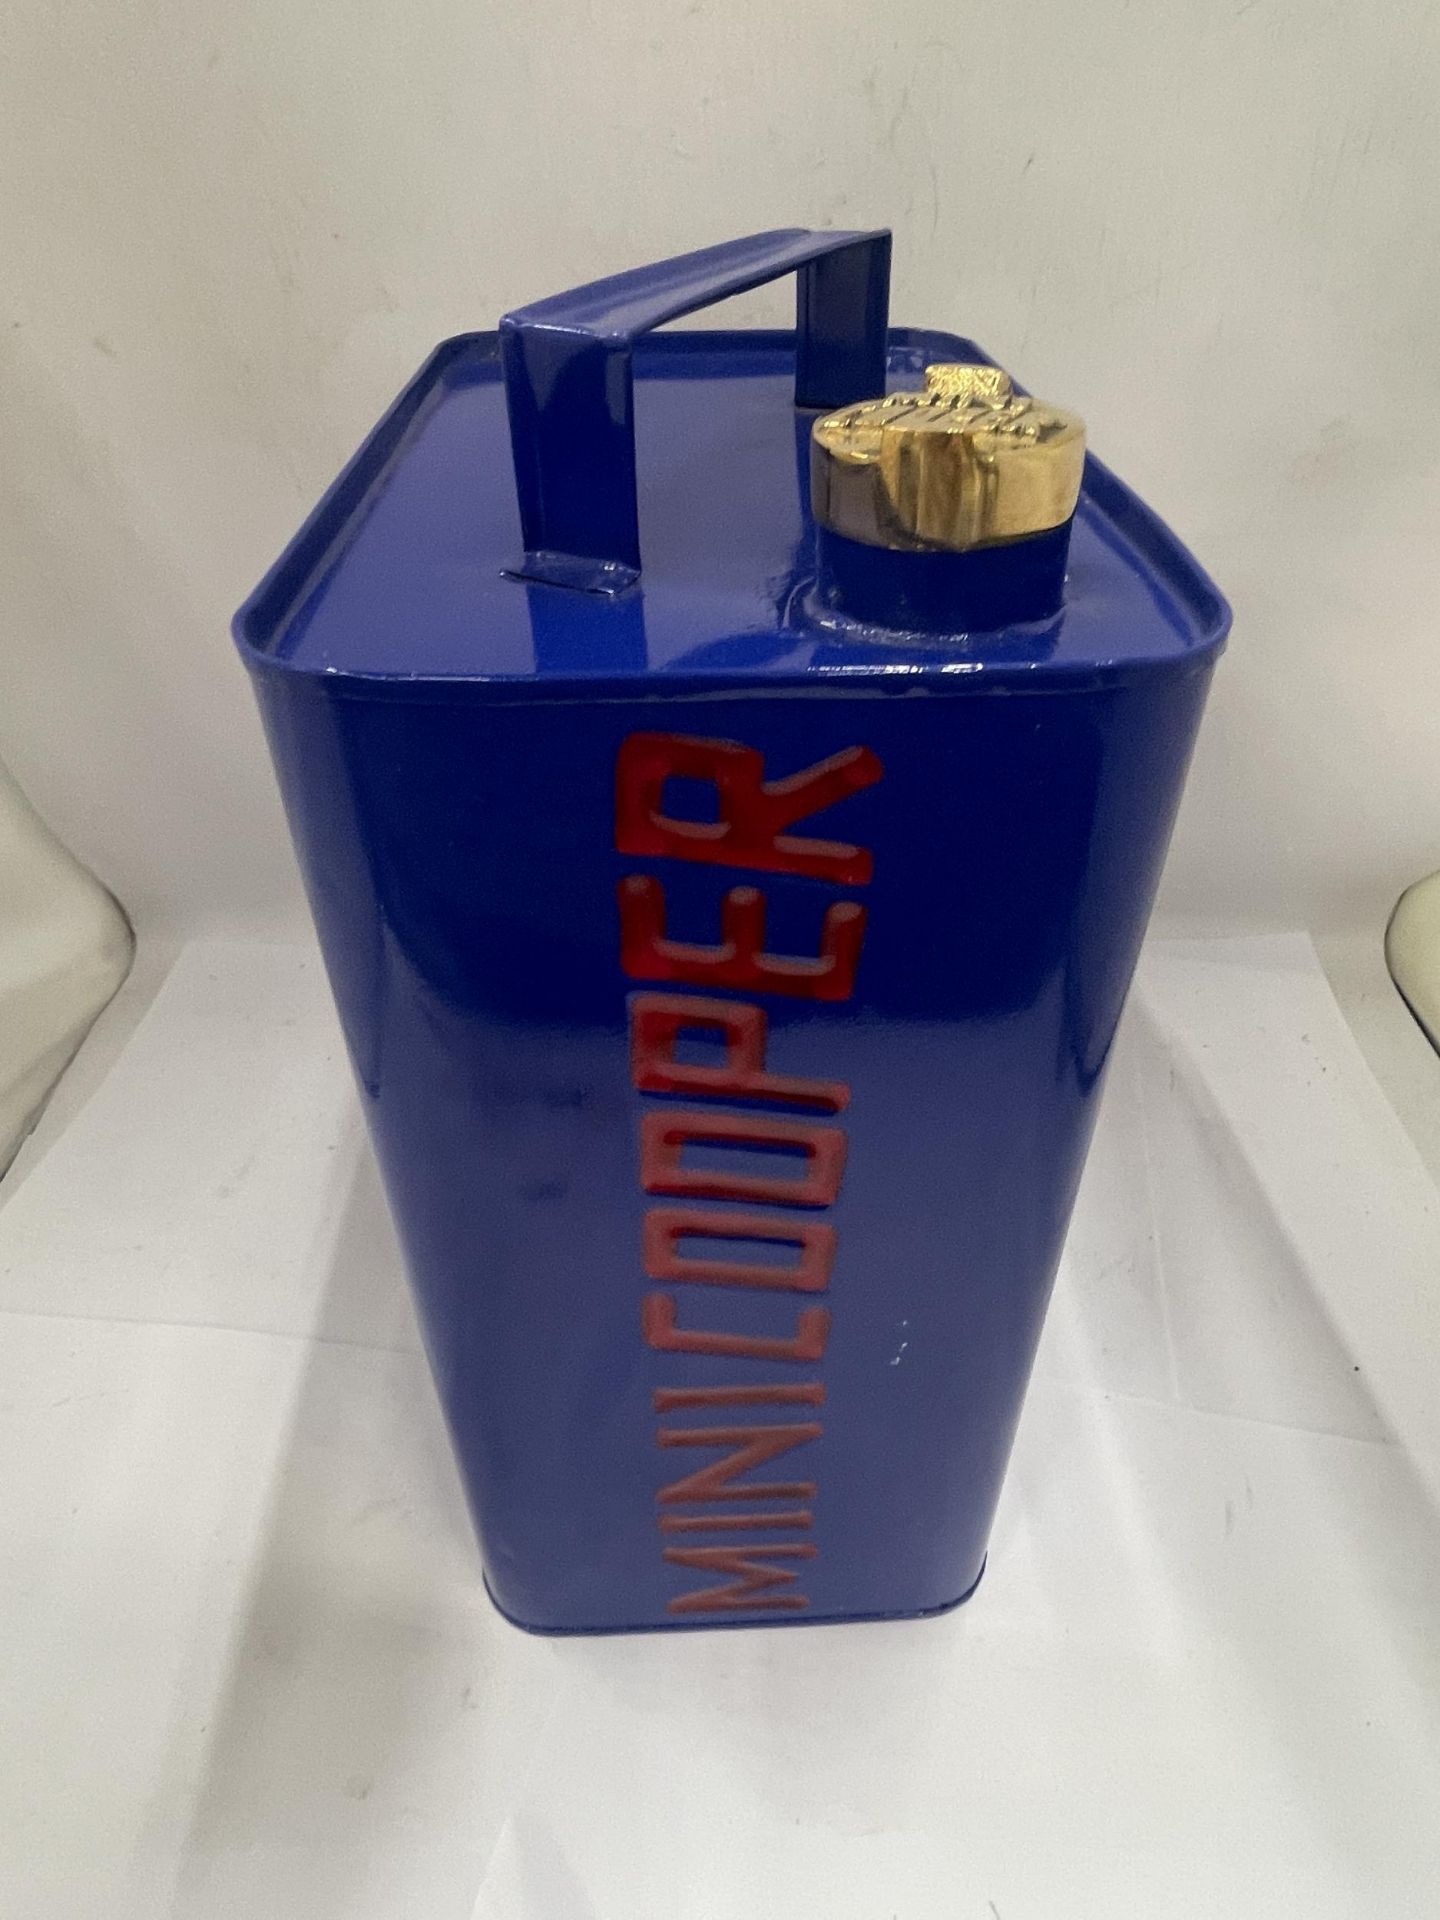 A BLUE MINI COOPER PETROL CAN WITH BRASS TOP - Image 2 of 3